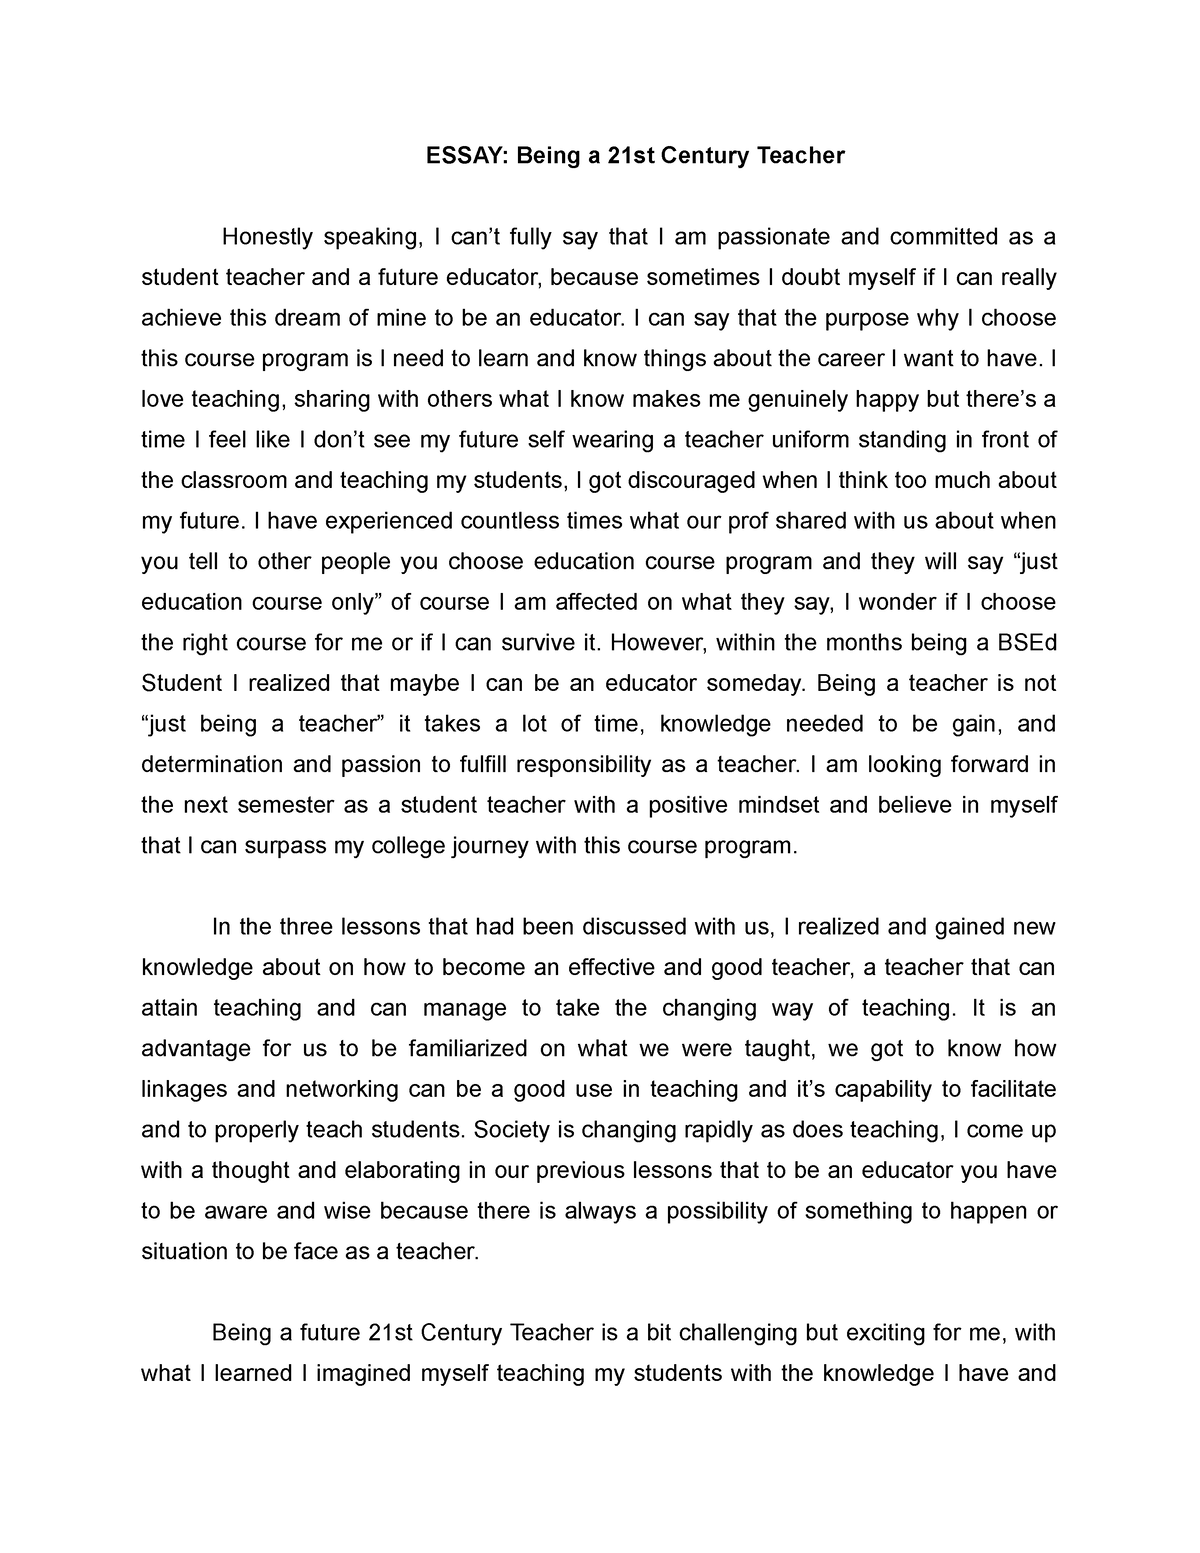 importance of education in 21st century essay